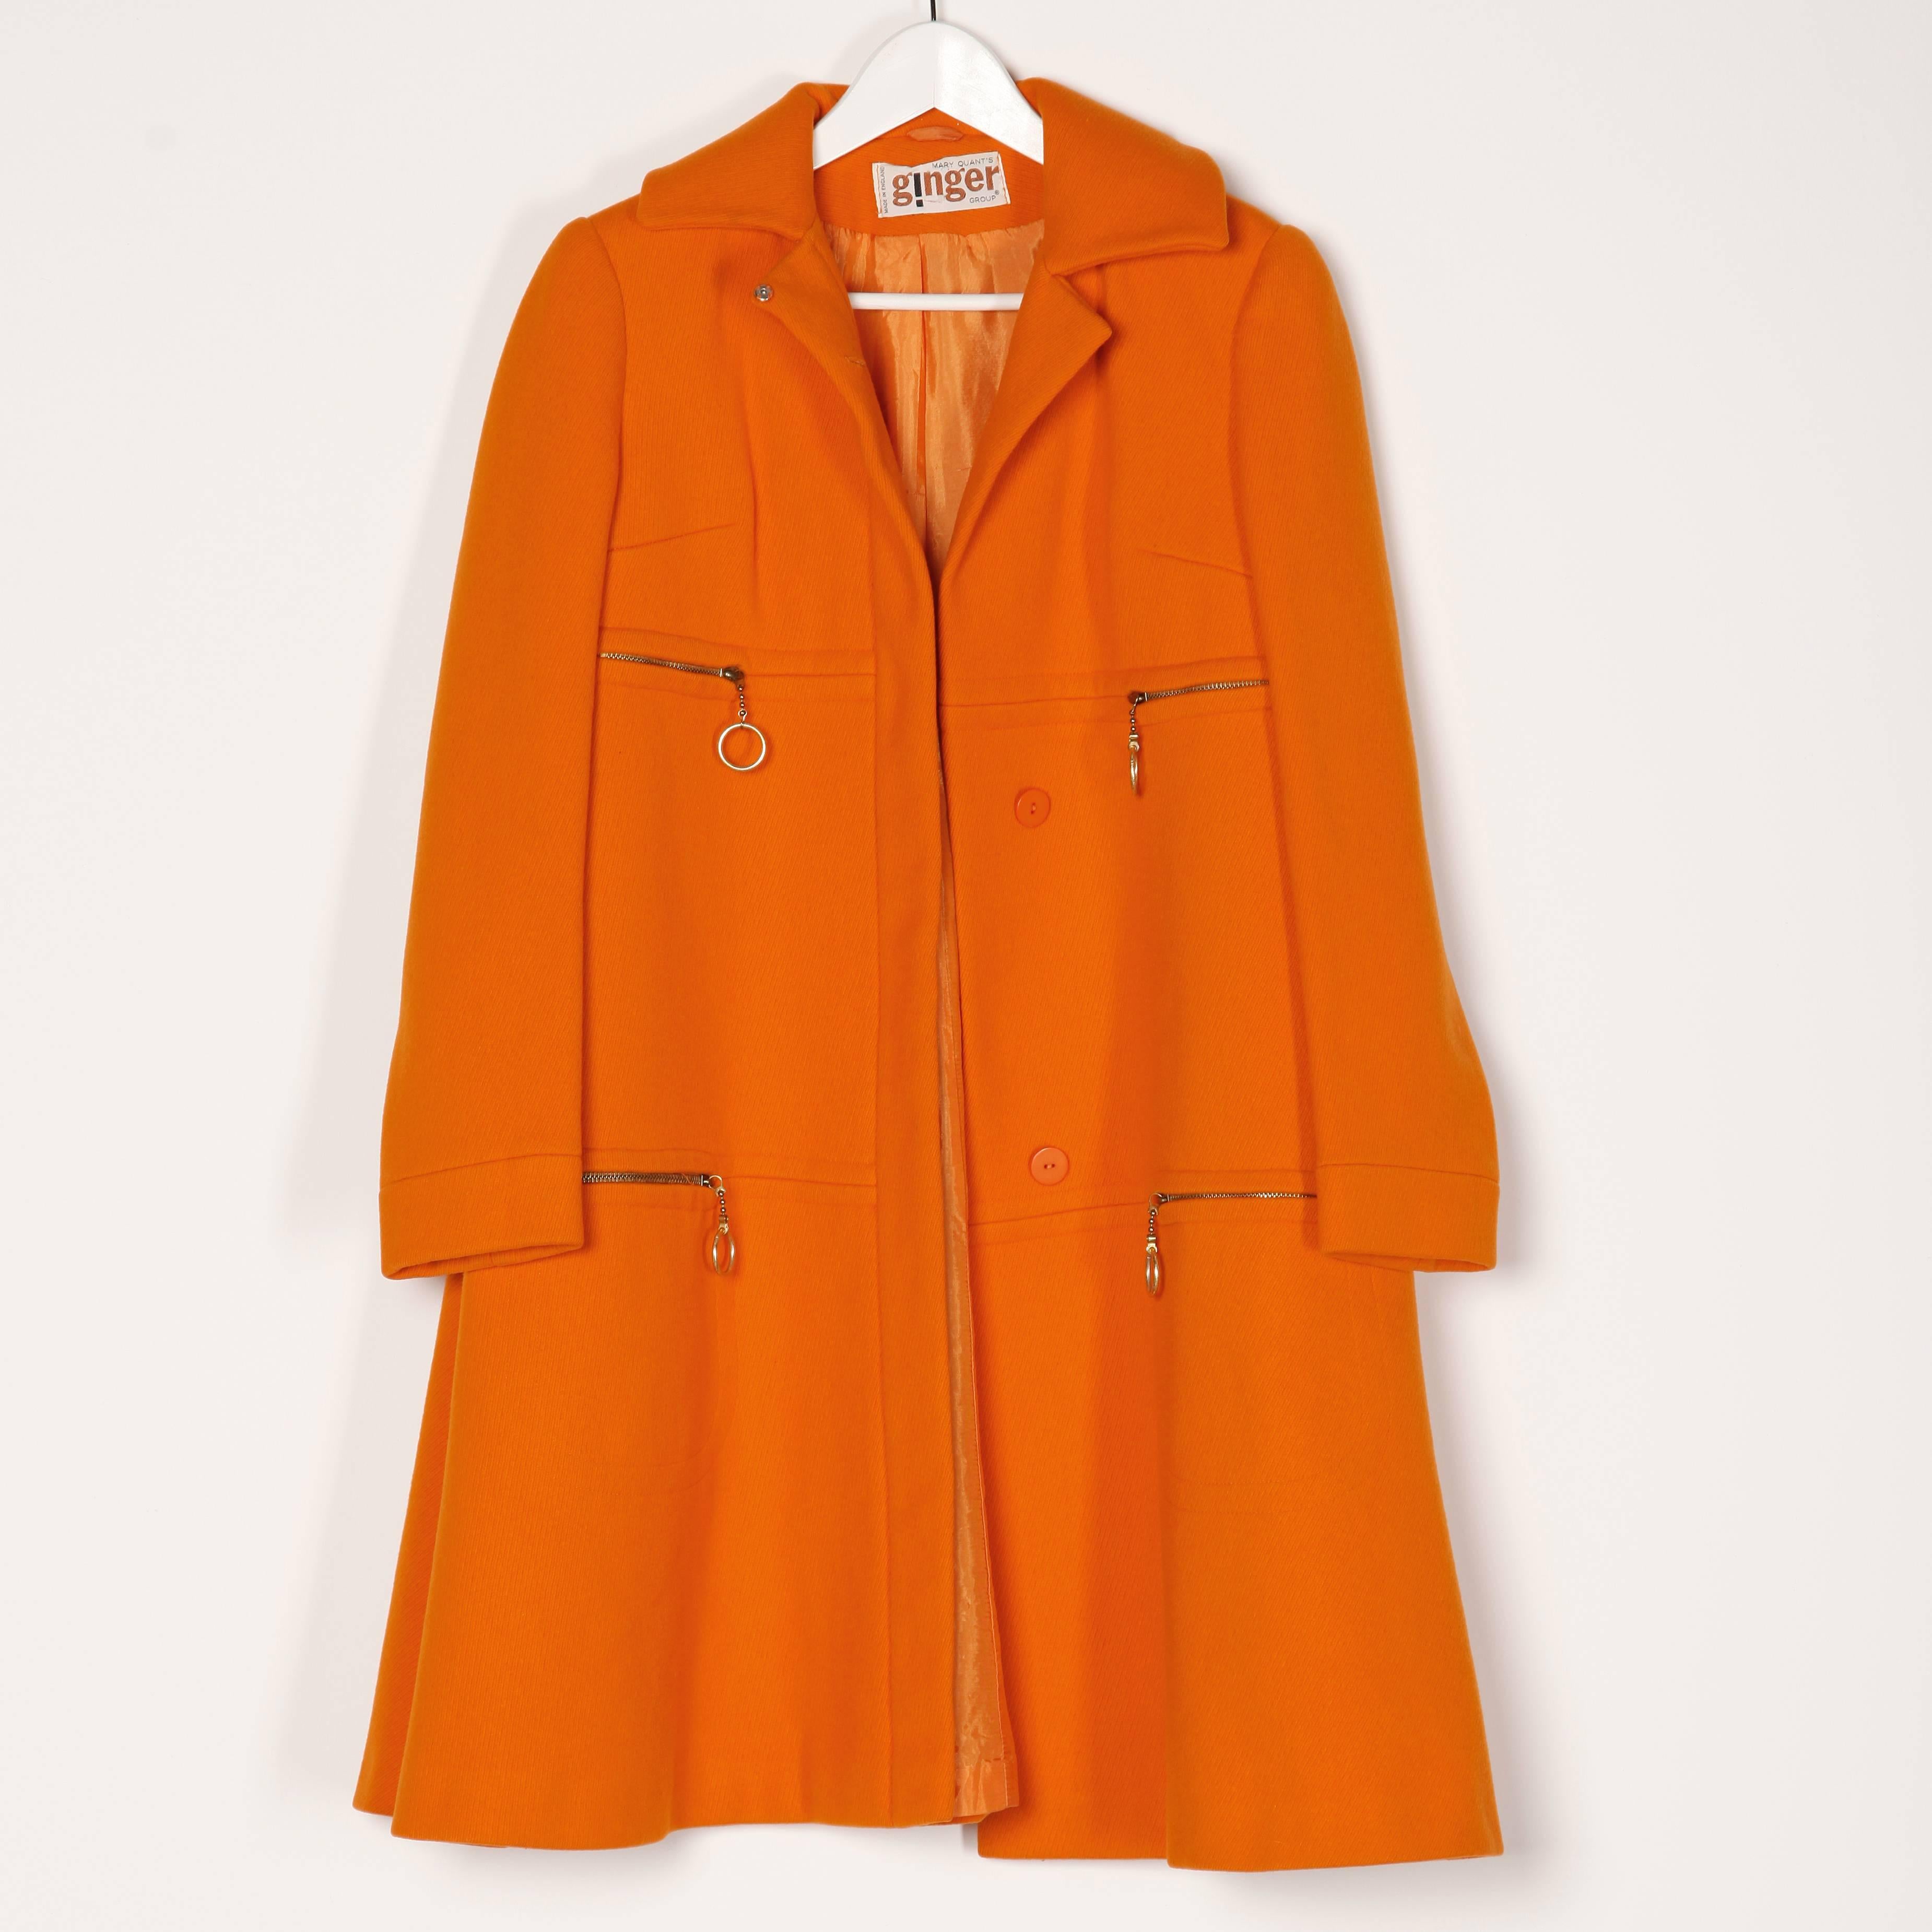 Mary Quant Vintage 1960s Mod Orange Wool Trapeze Swing Coat with Ring Pulls 1